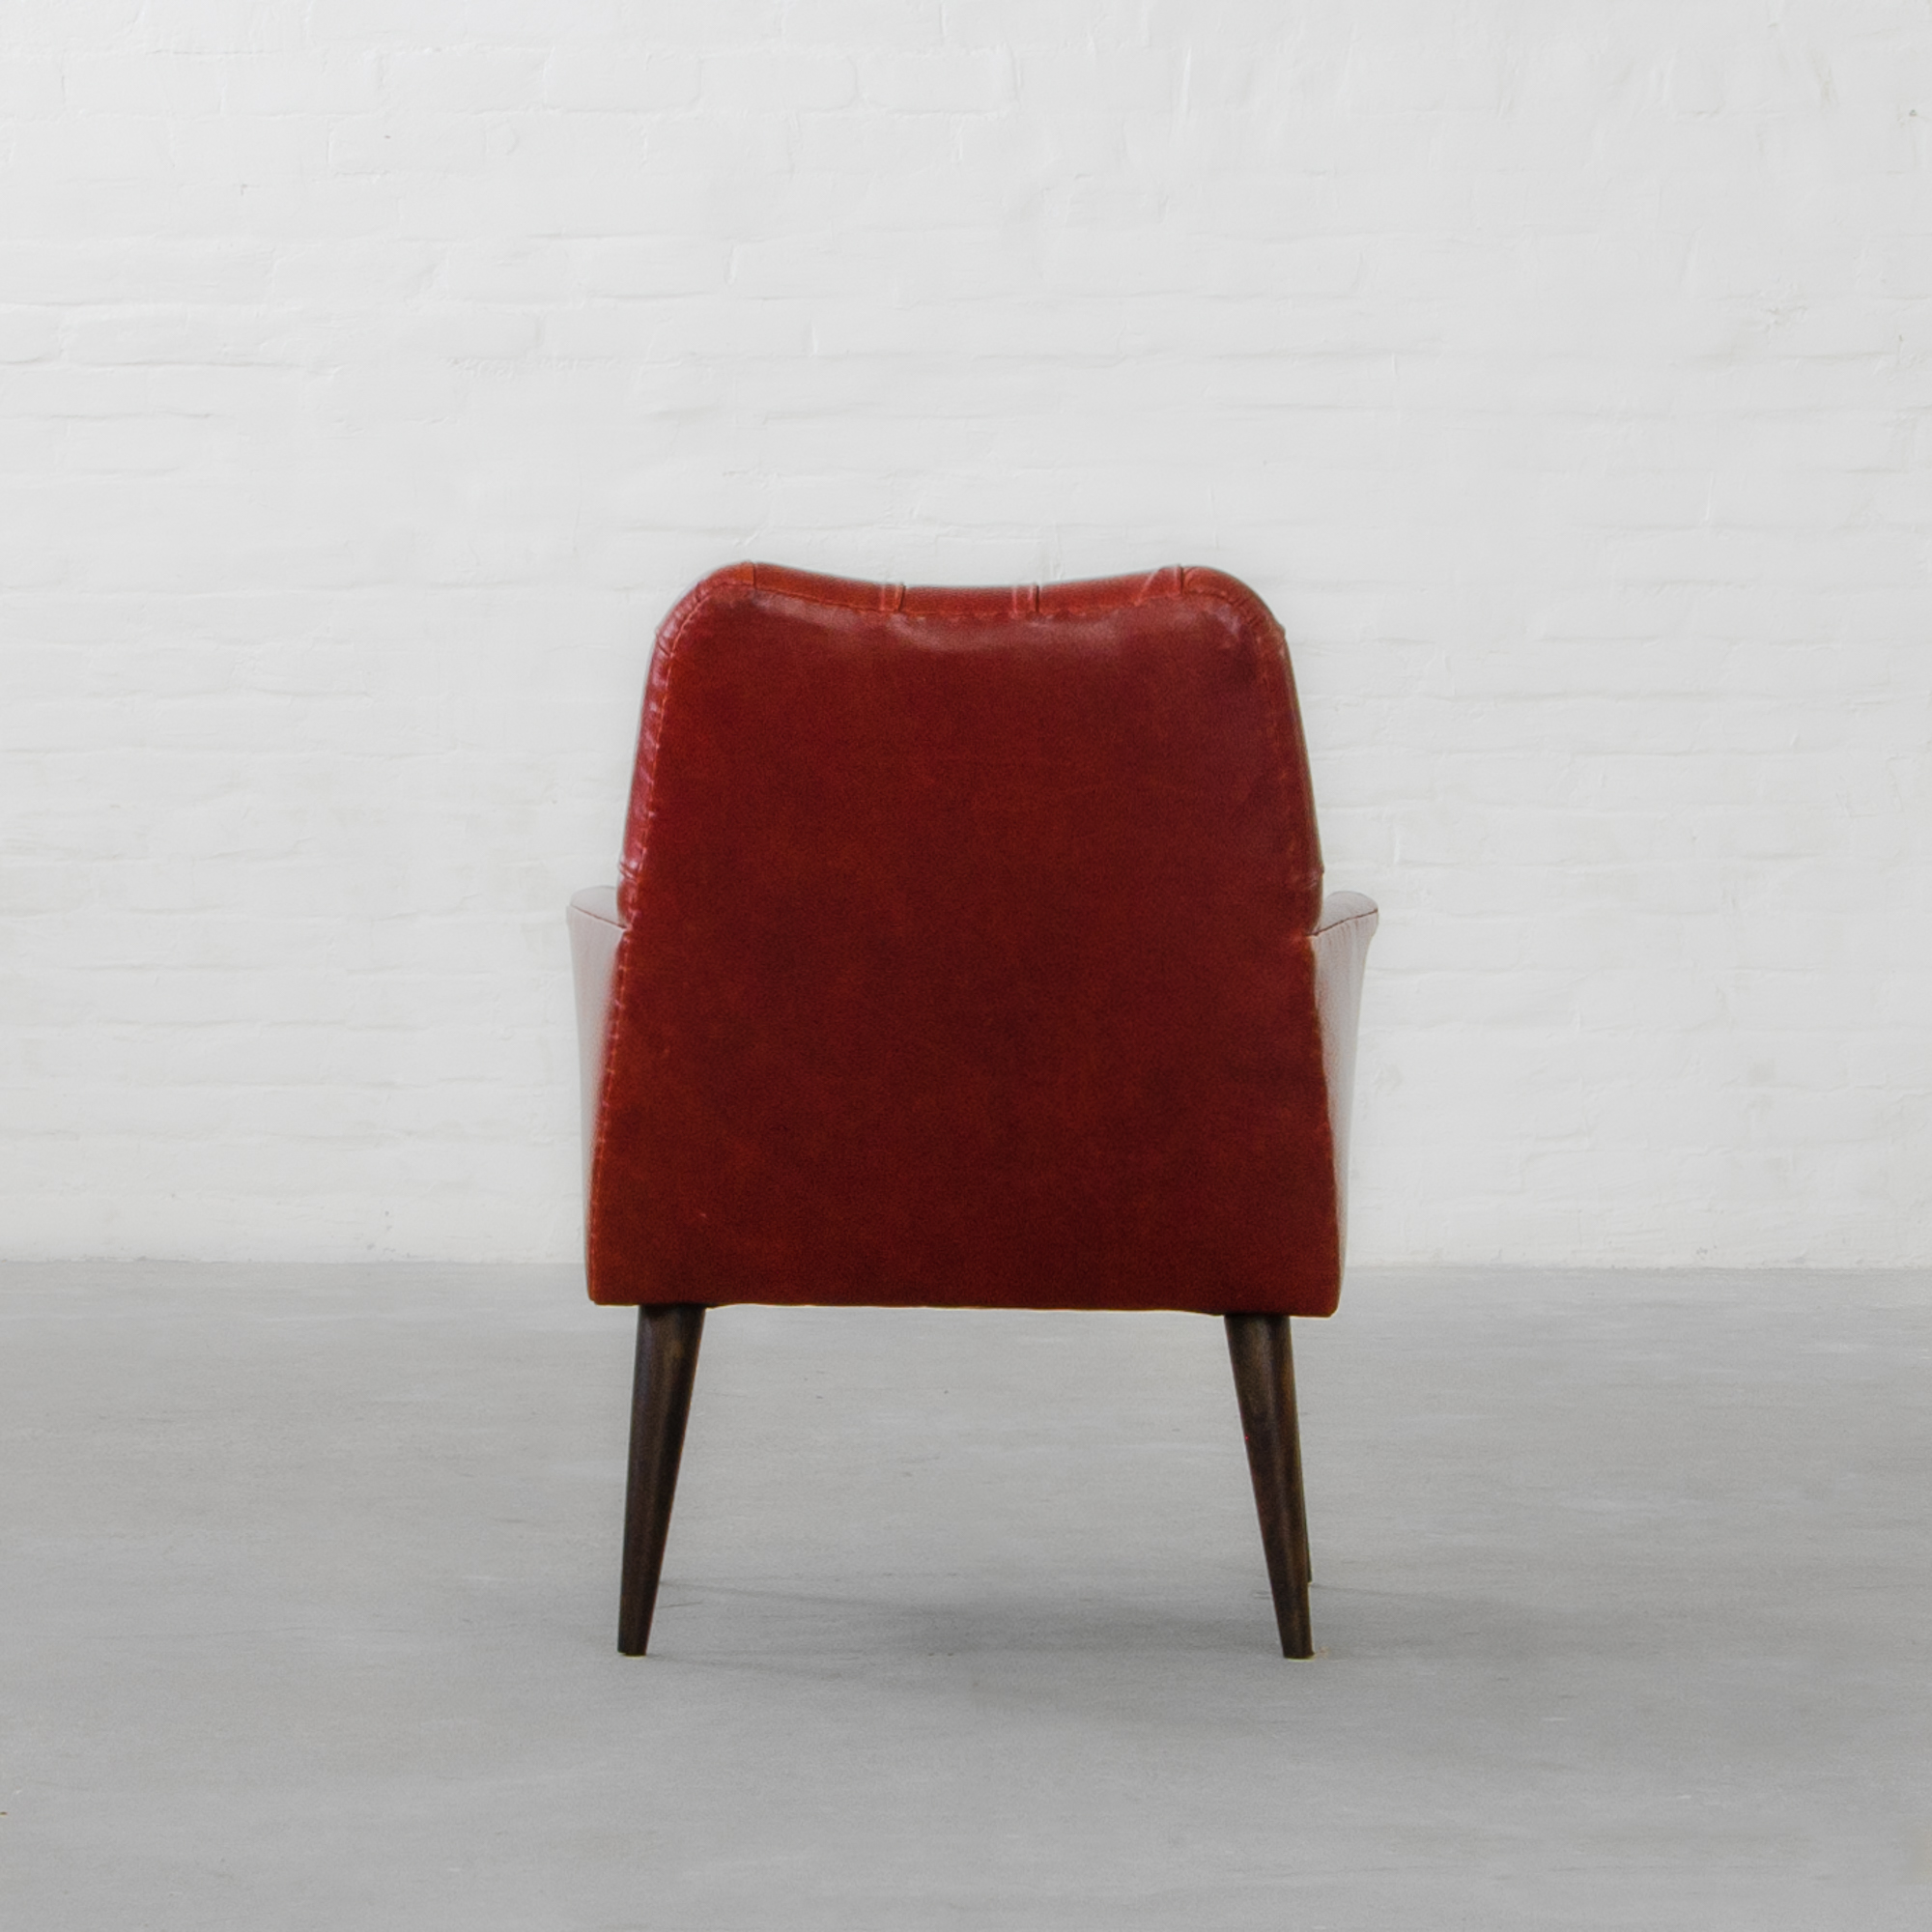 Milan Tufted Leather Armchair Collection